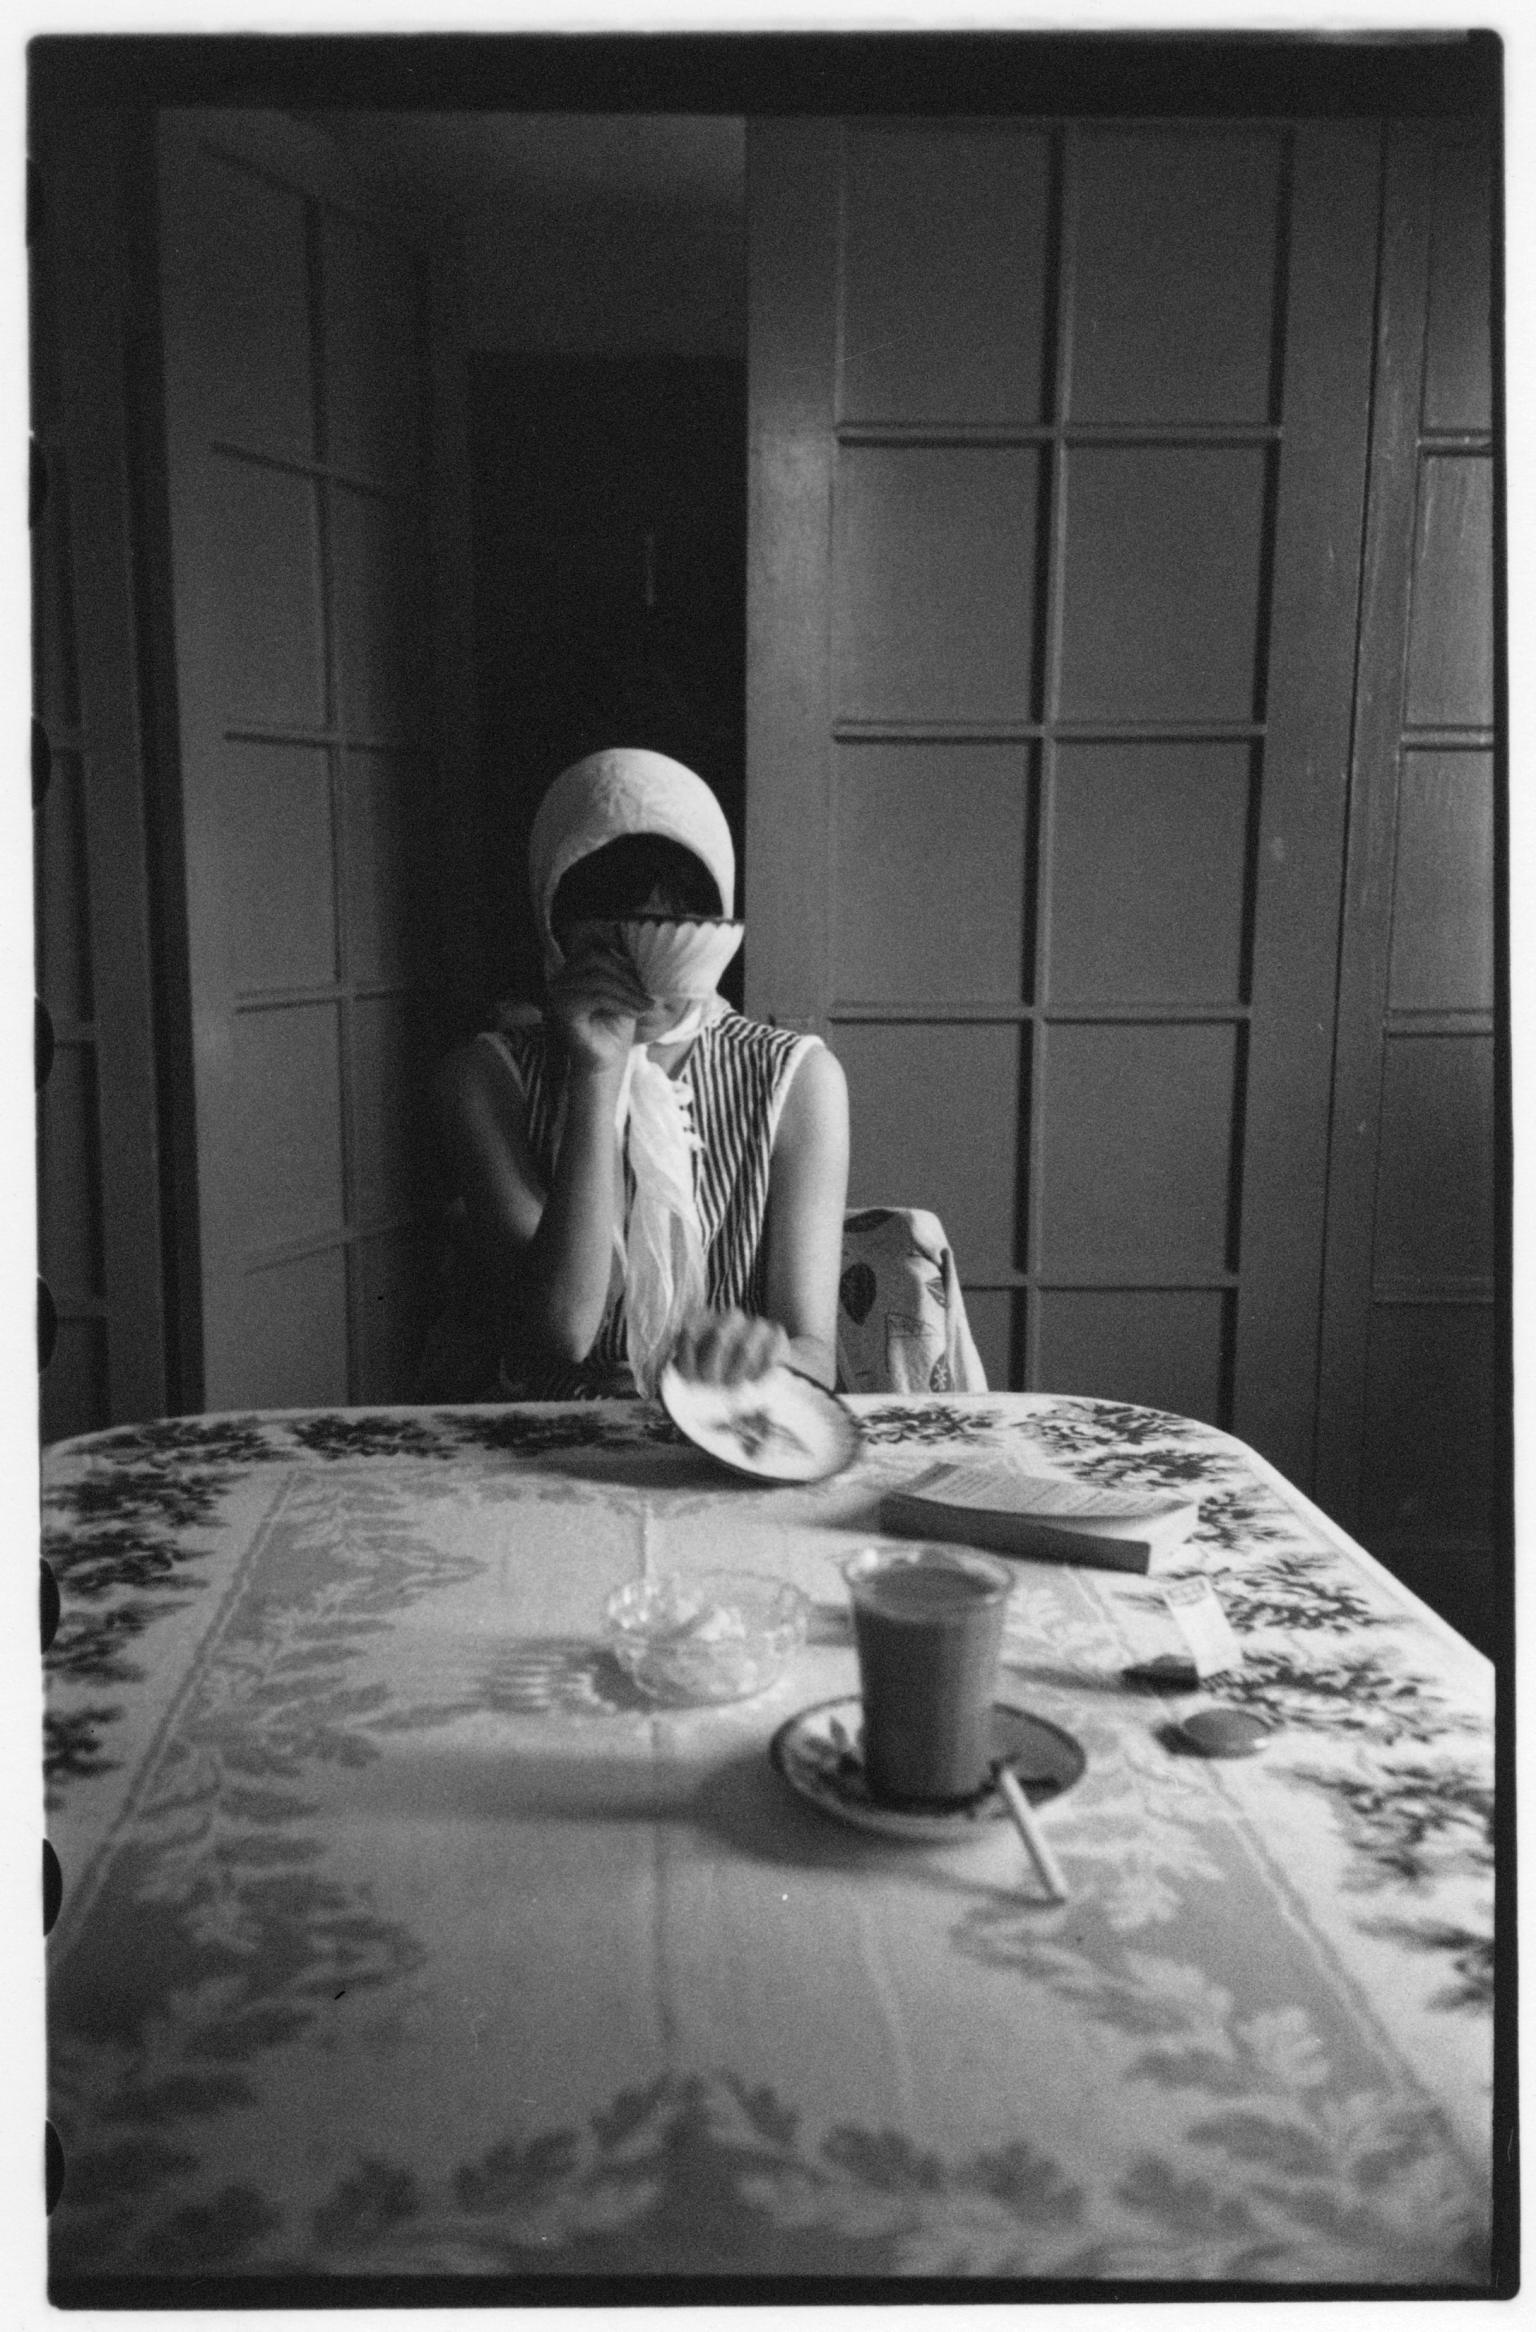 Photograph of woman sitting at the end of a table in front of open doors, wearing a scarf and covering her face with tea cup.